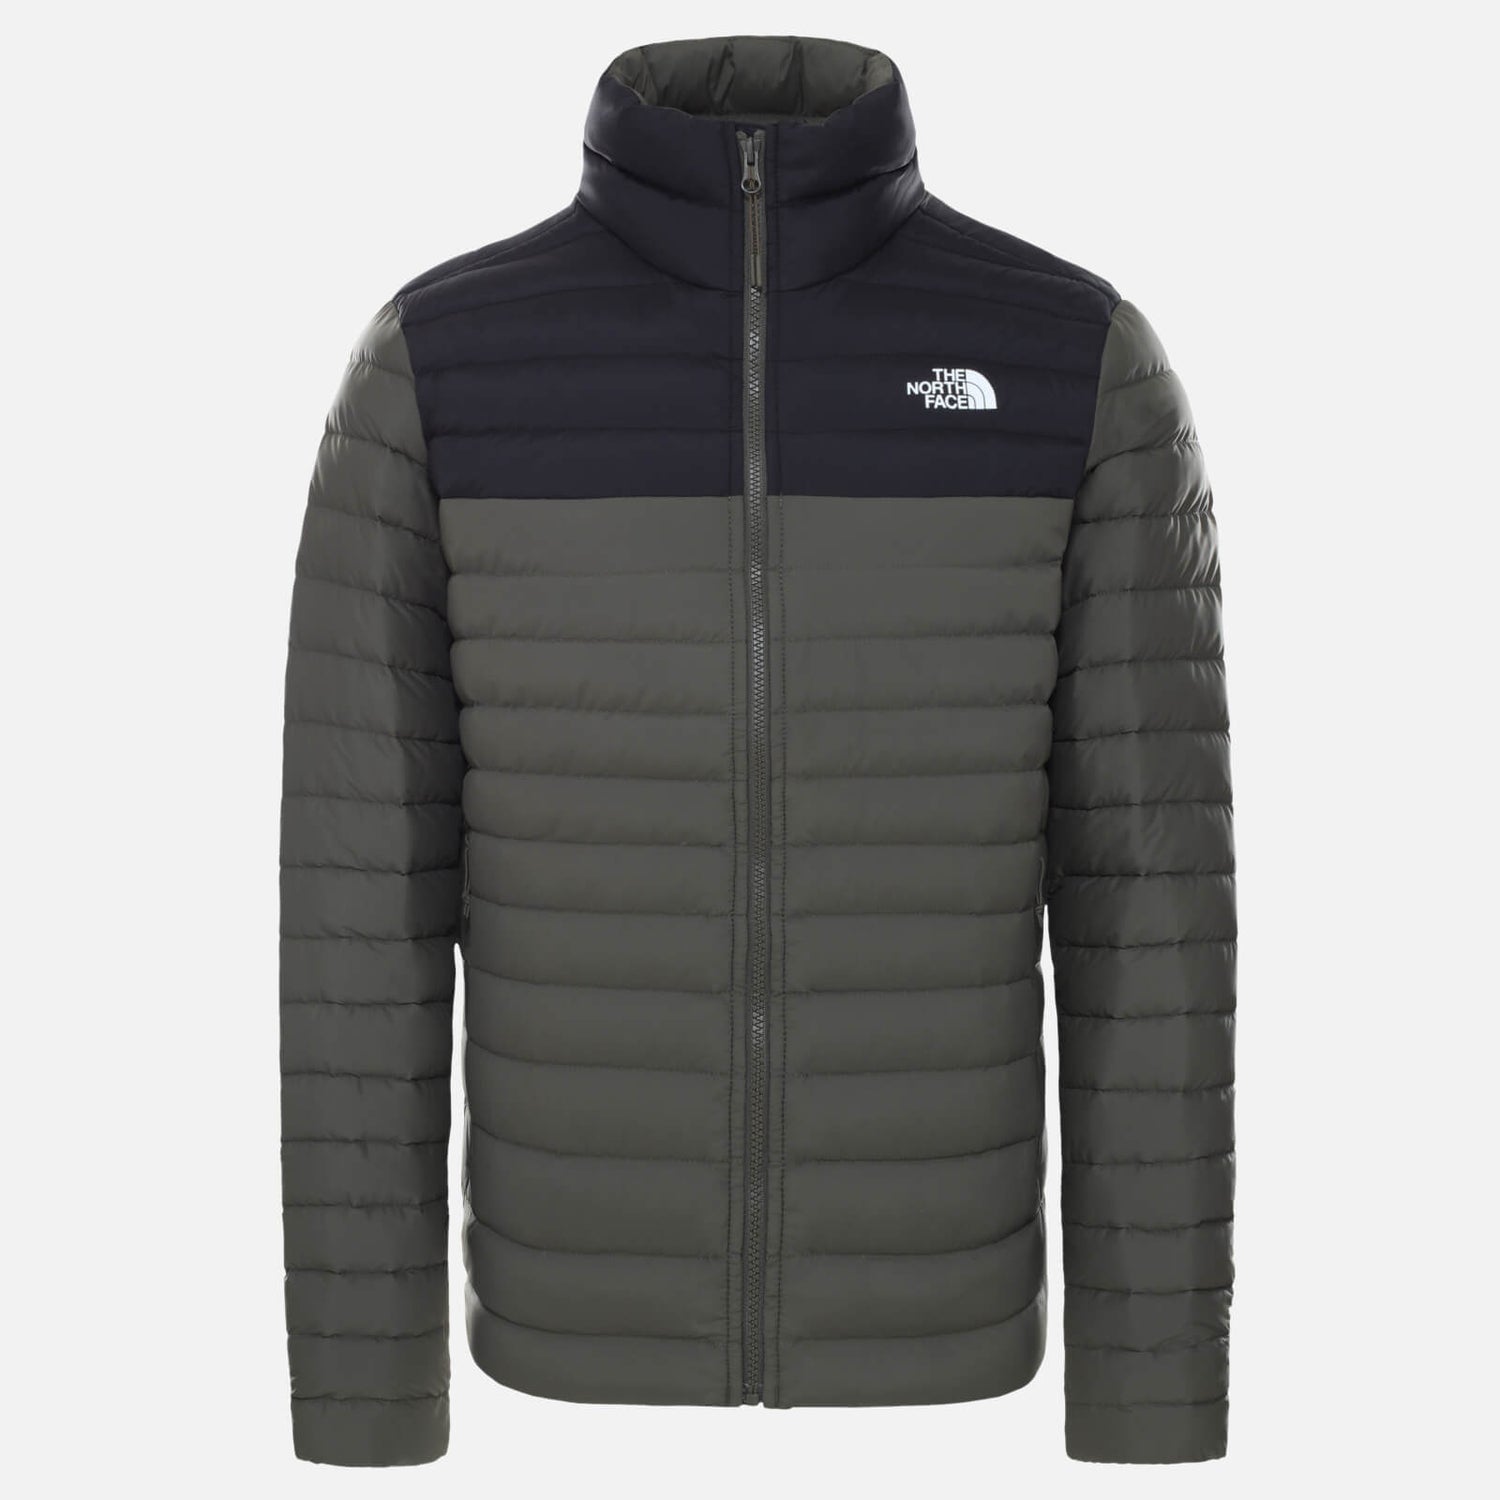 The North Face Men's Stretch Down Jacket - New Taupe Green/TNF Black